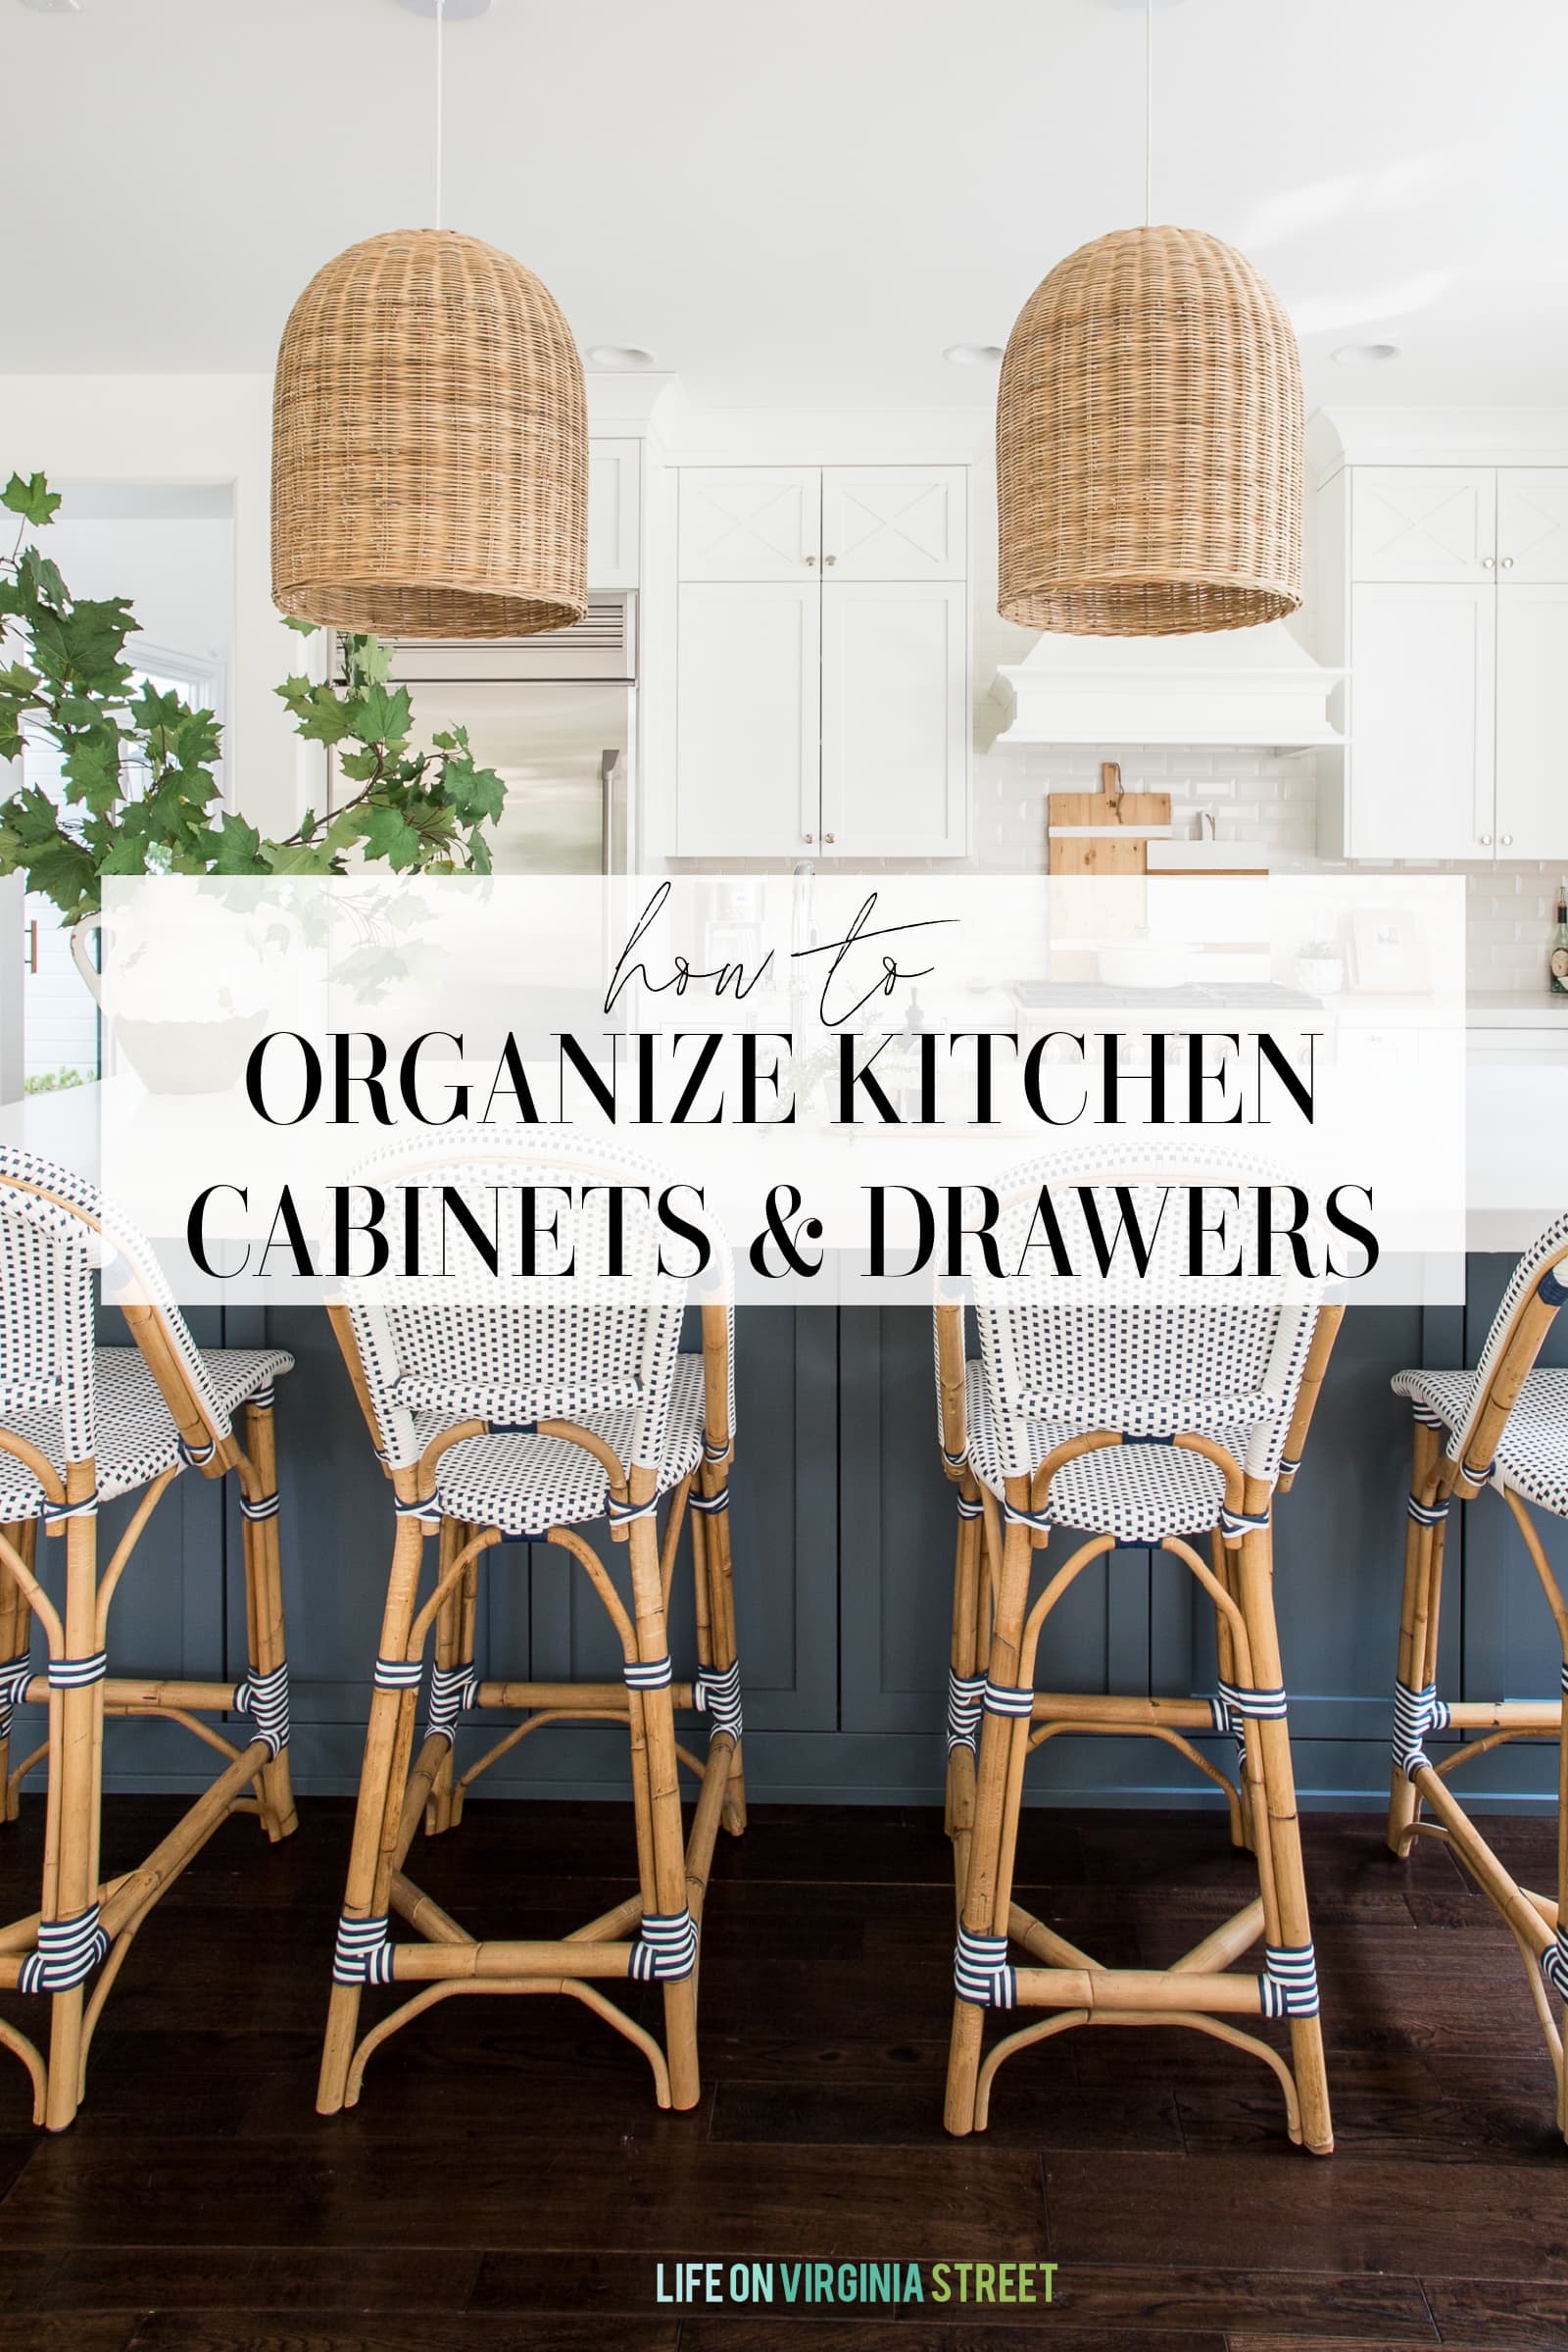 https://lifeonvirginiastreet.com/wp-content/uploads/2021/02/how-to-organize-kitchen-cabinets-drawers.jpg